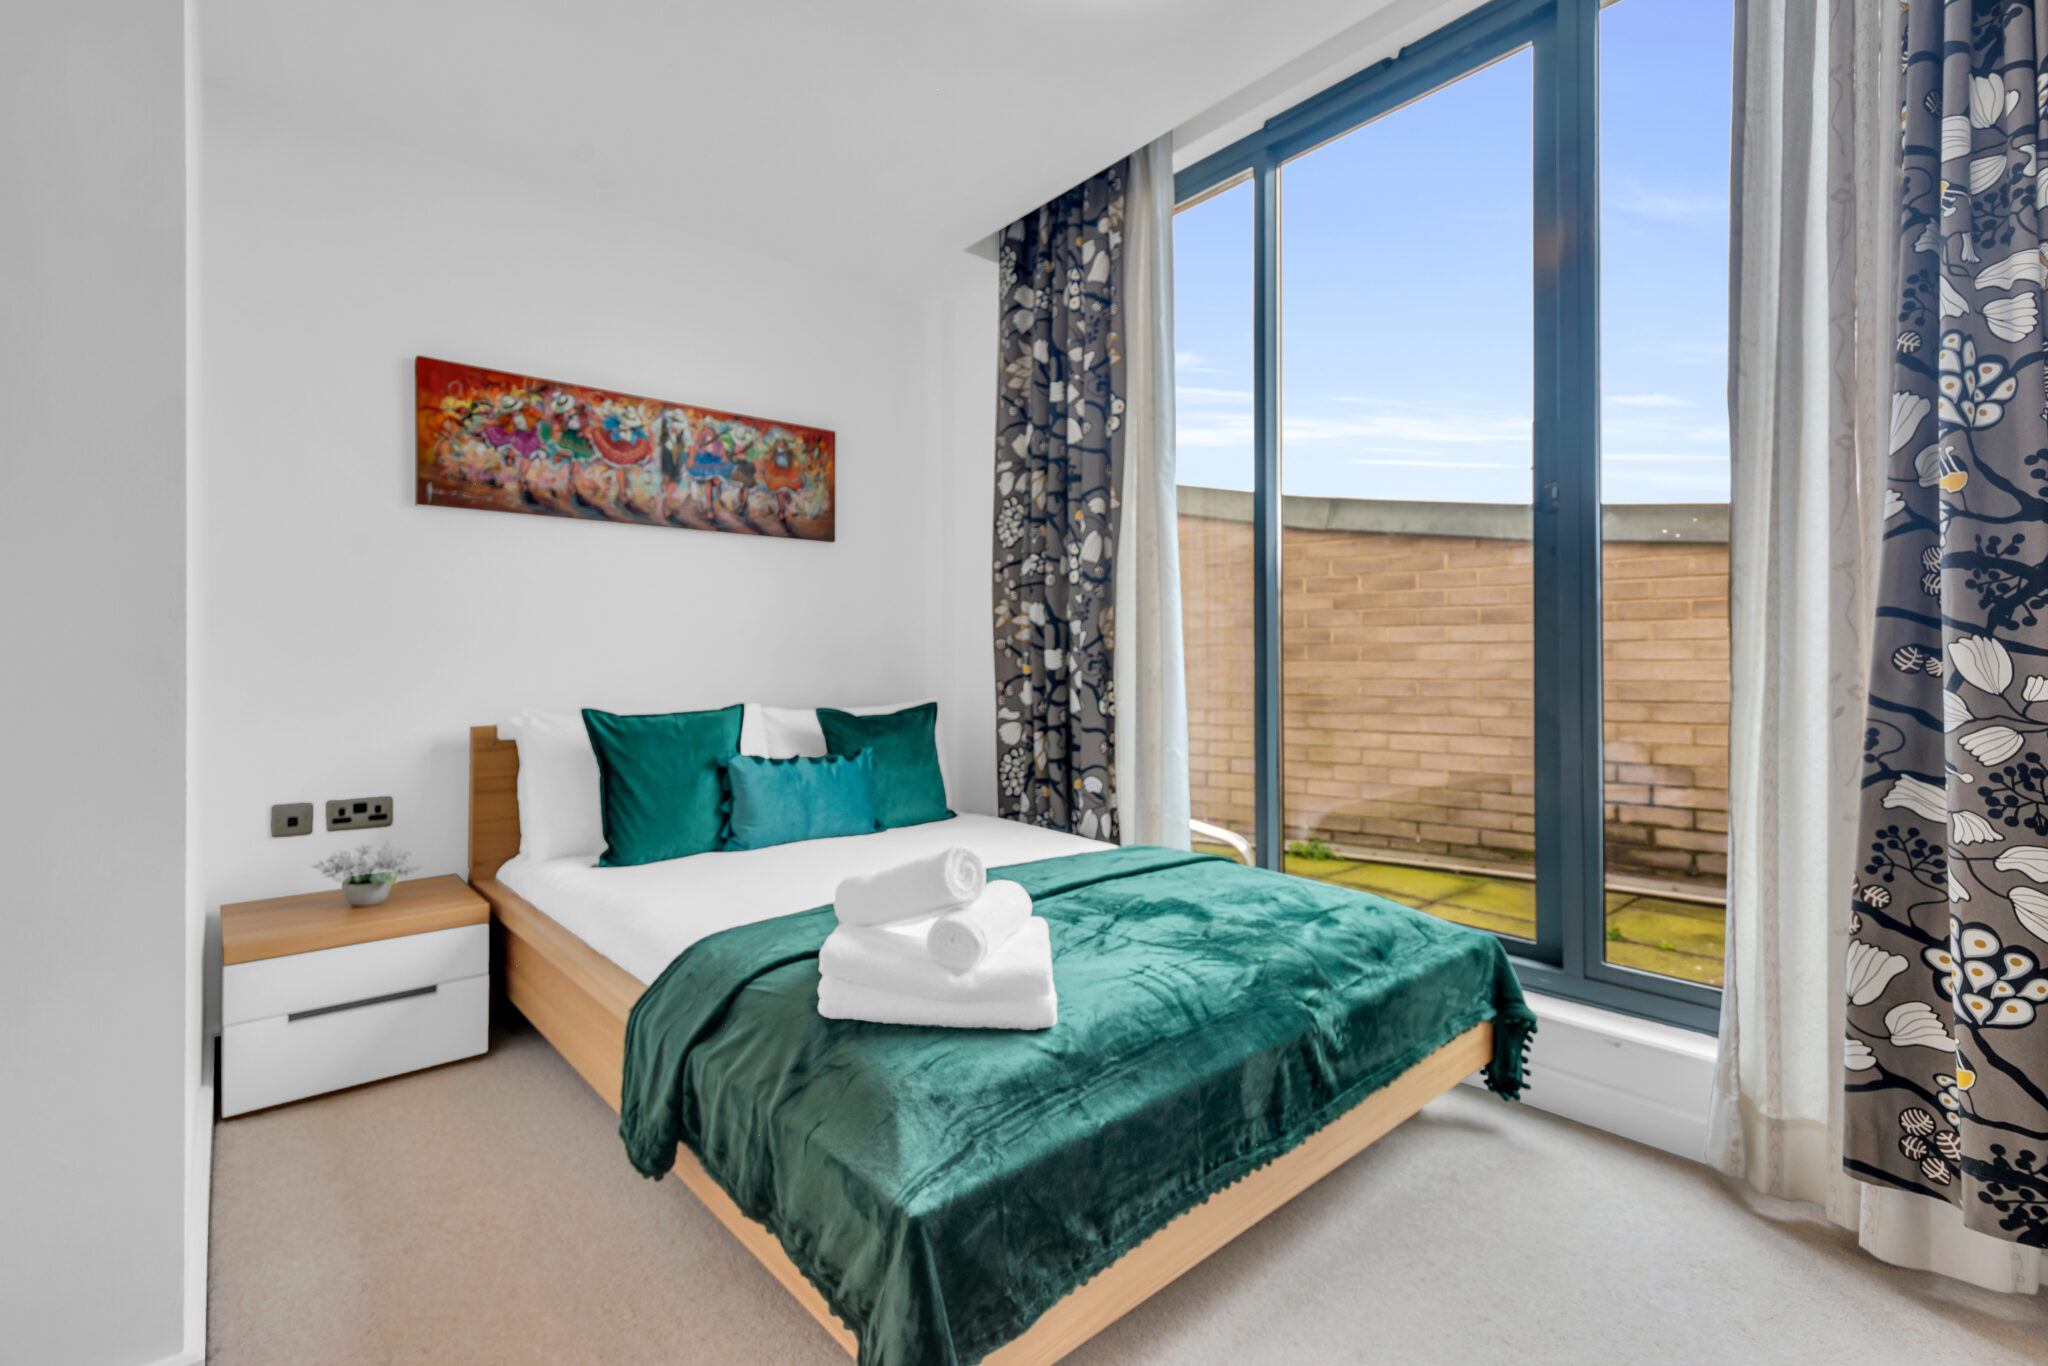 Book-our-Luxury-Accommodation-Near-Regent's-Park-and-stay-in-one-of-London's-Most-Desirable-Area!-Camden,-Euston-and-Kings-Cross-are-close-by-|-Urban-Stay